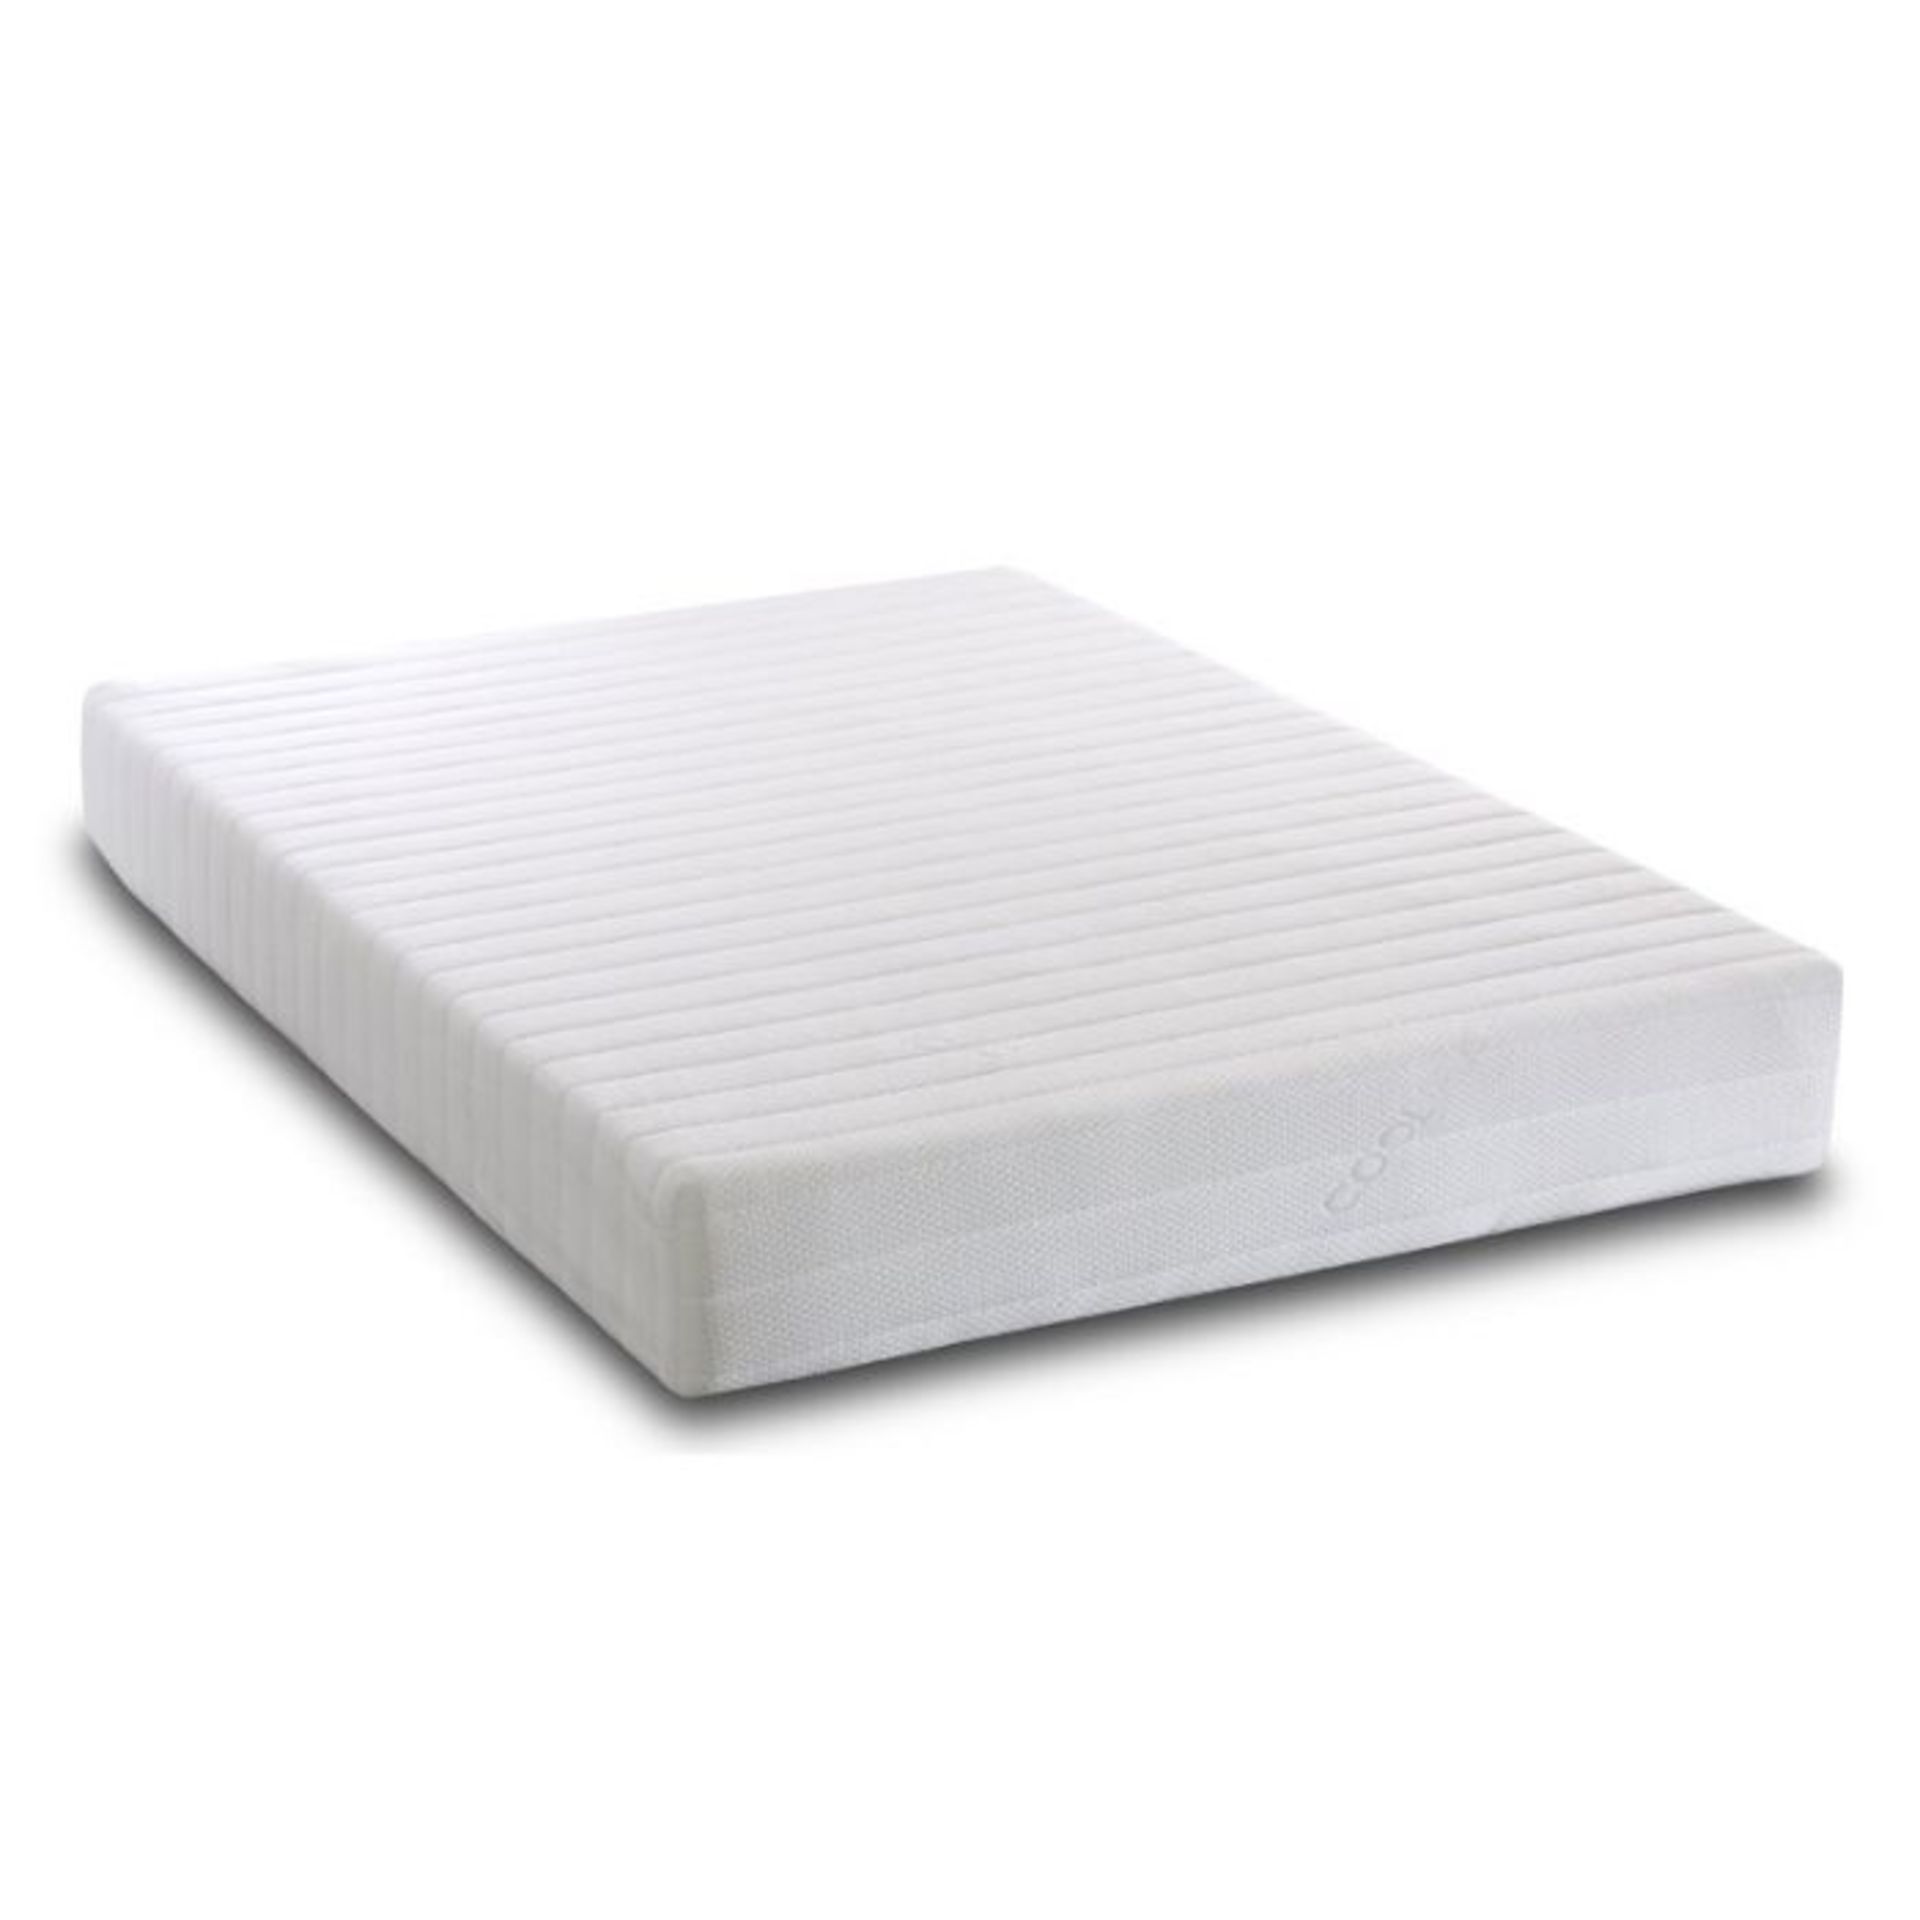 6 FT OPEN COILED ROLLED UP MATTRESS (DIRTY MARKS)(